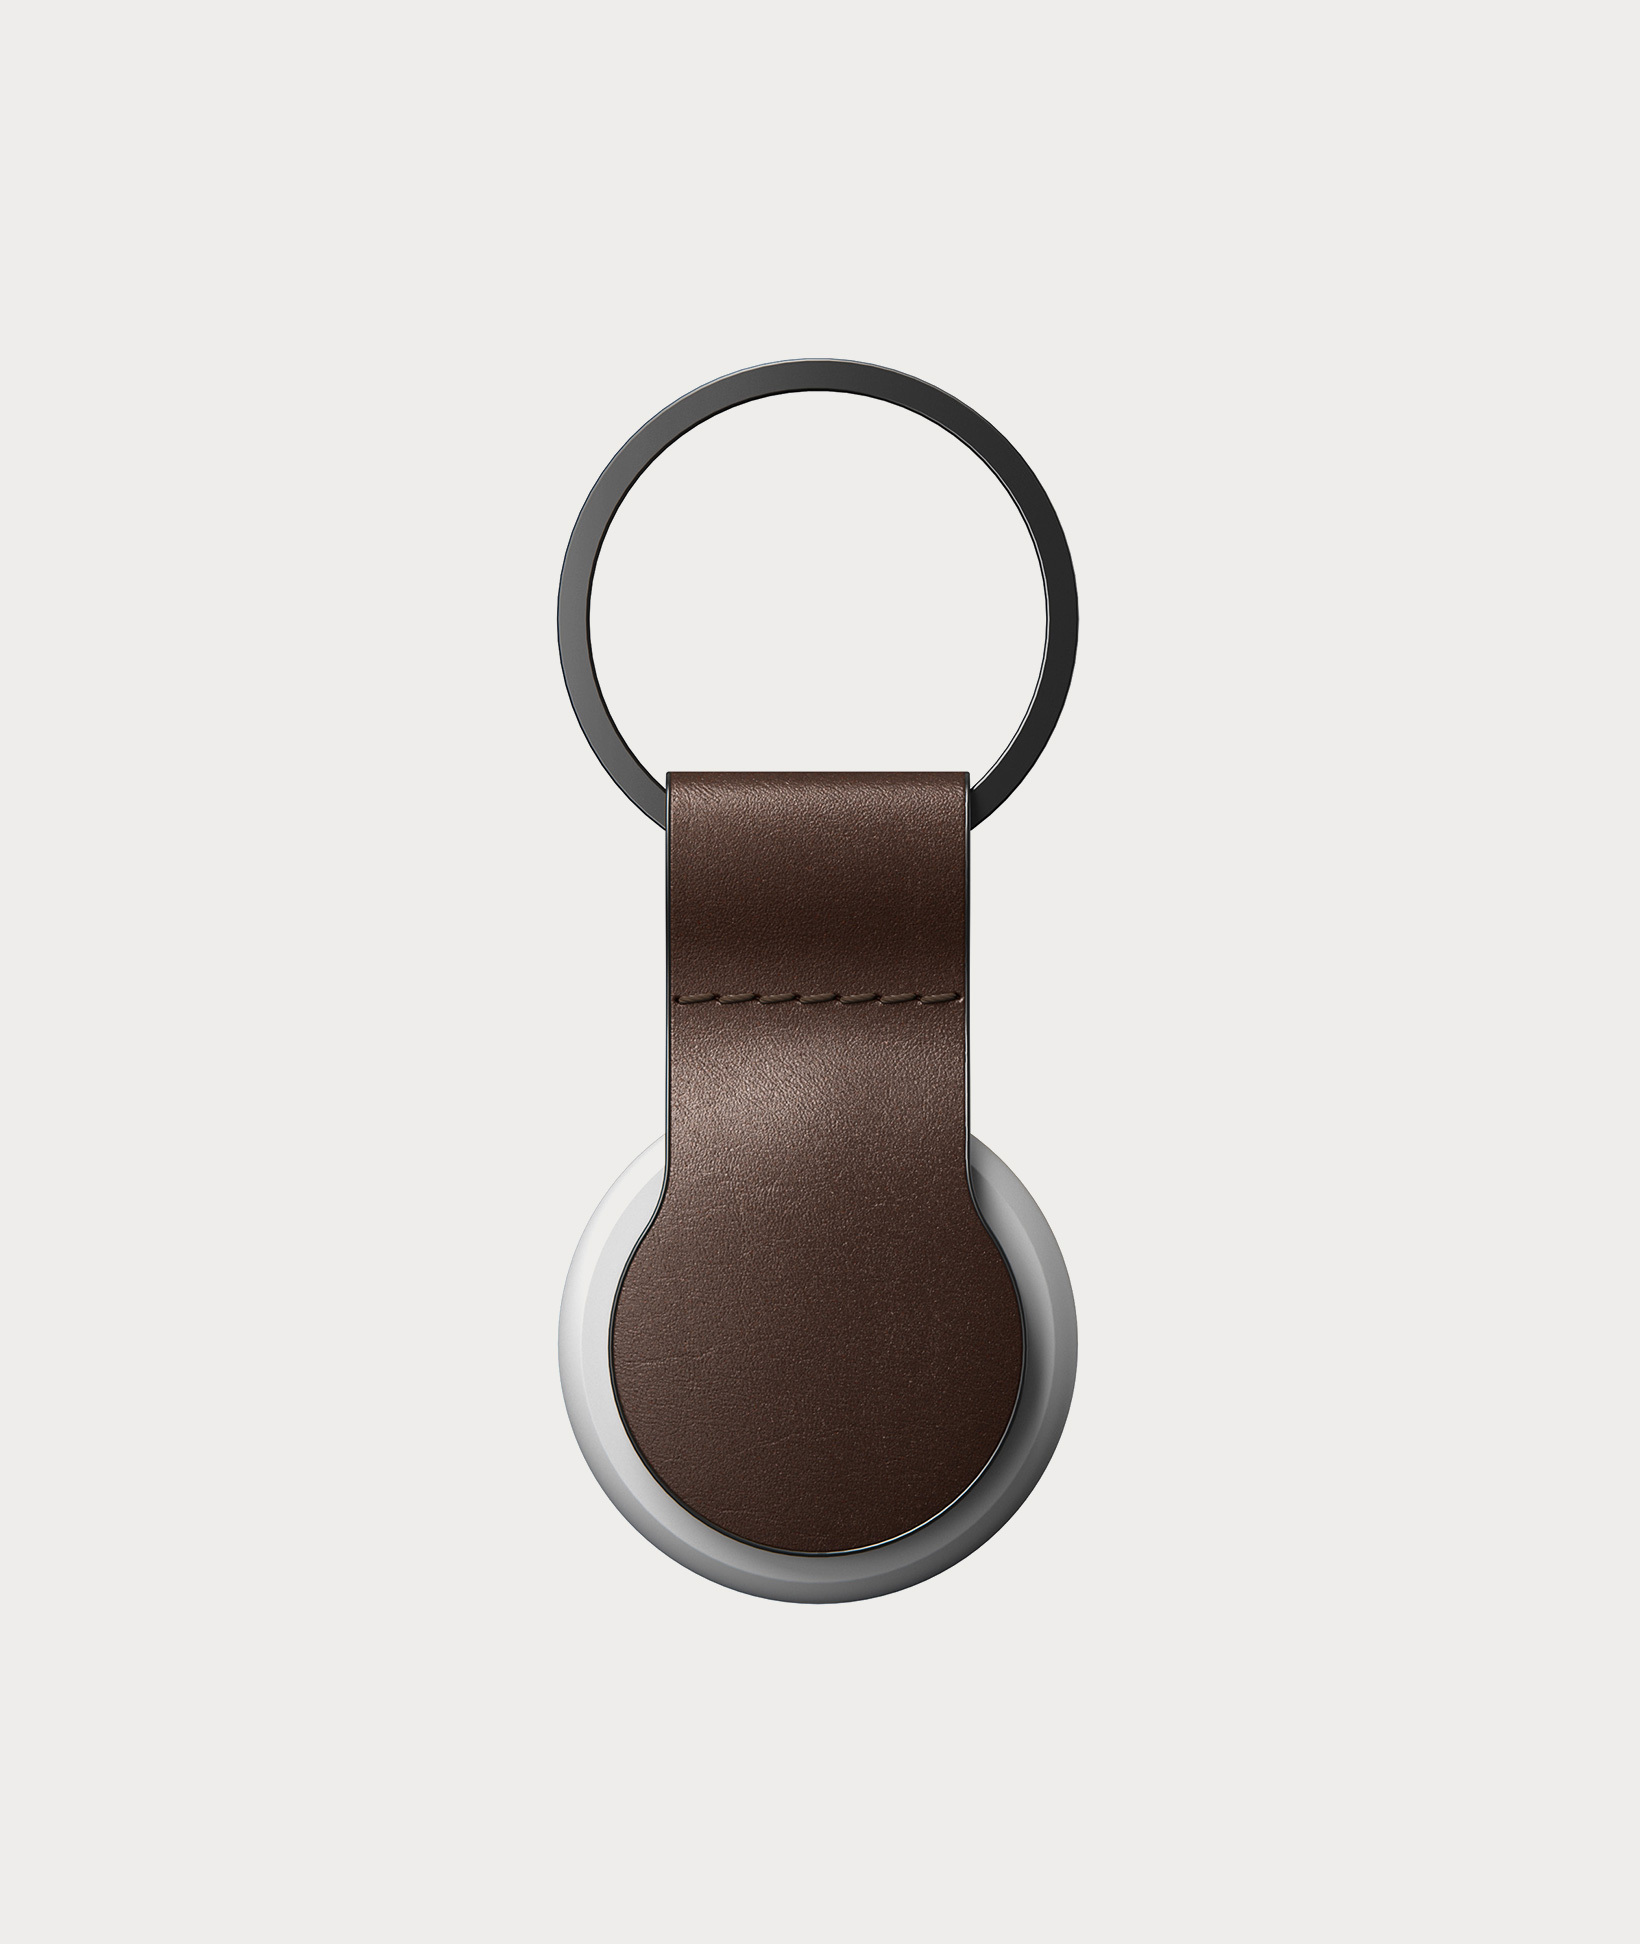 Nomad Leather Loop for AirTags™ - Rustic Brown Leather… - Moment | Schlüsselanhänger